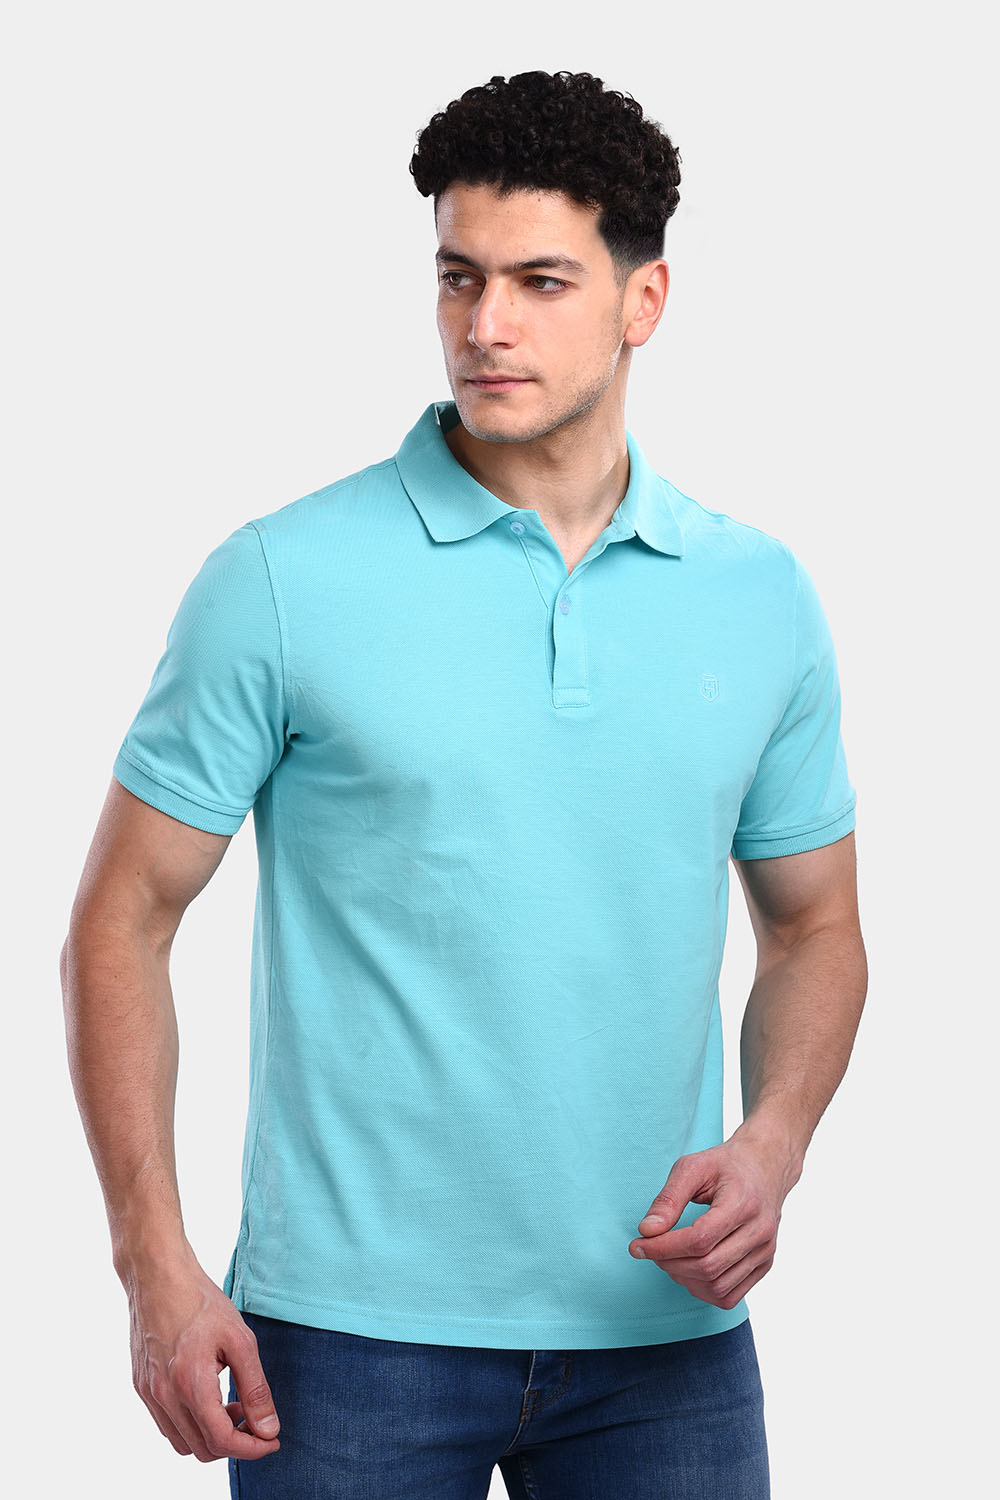 Polo Shirt Regular Fit Turquoies - TIE HOUSE